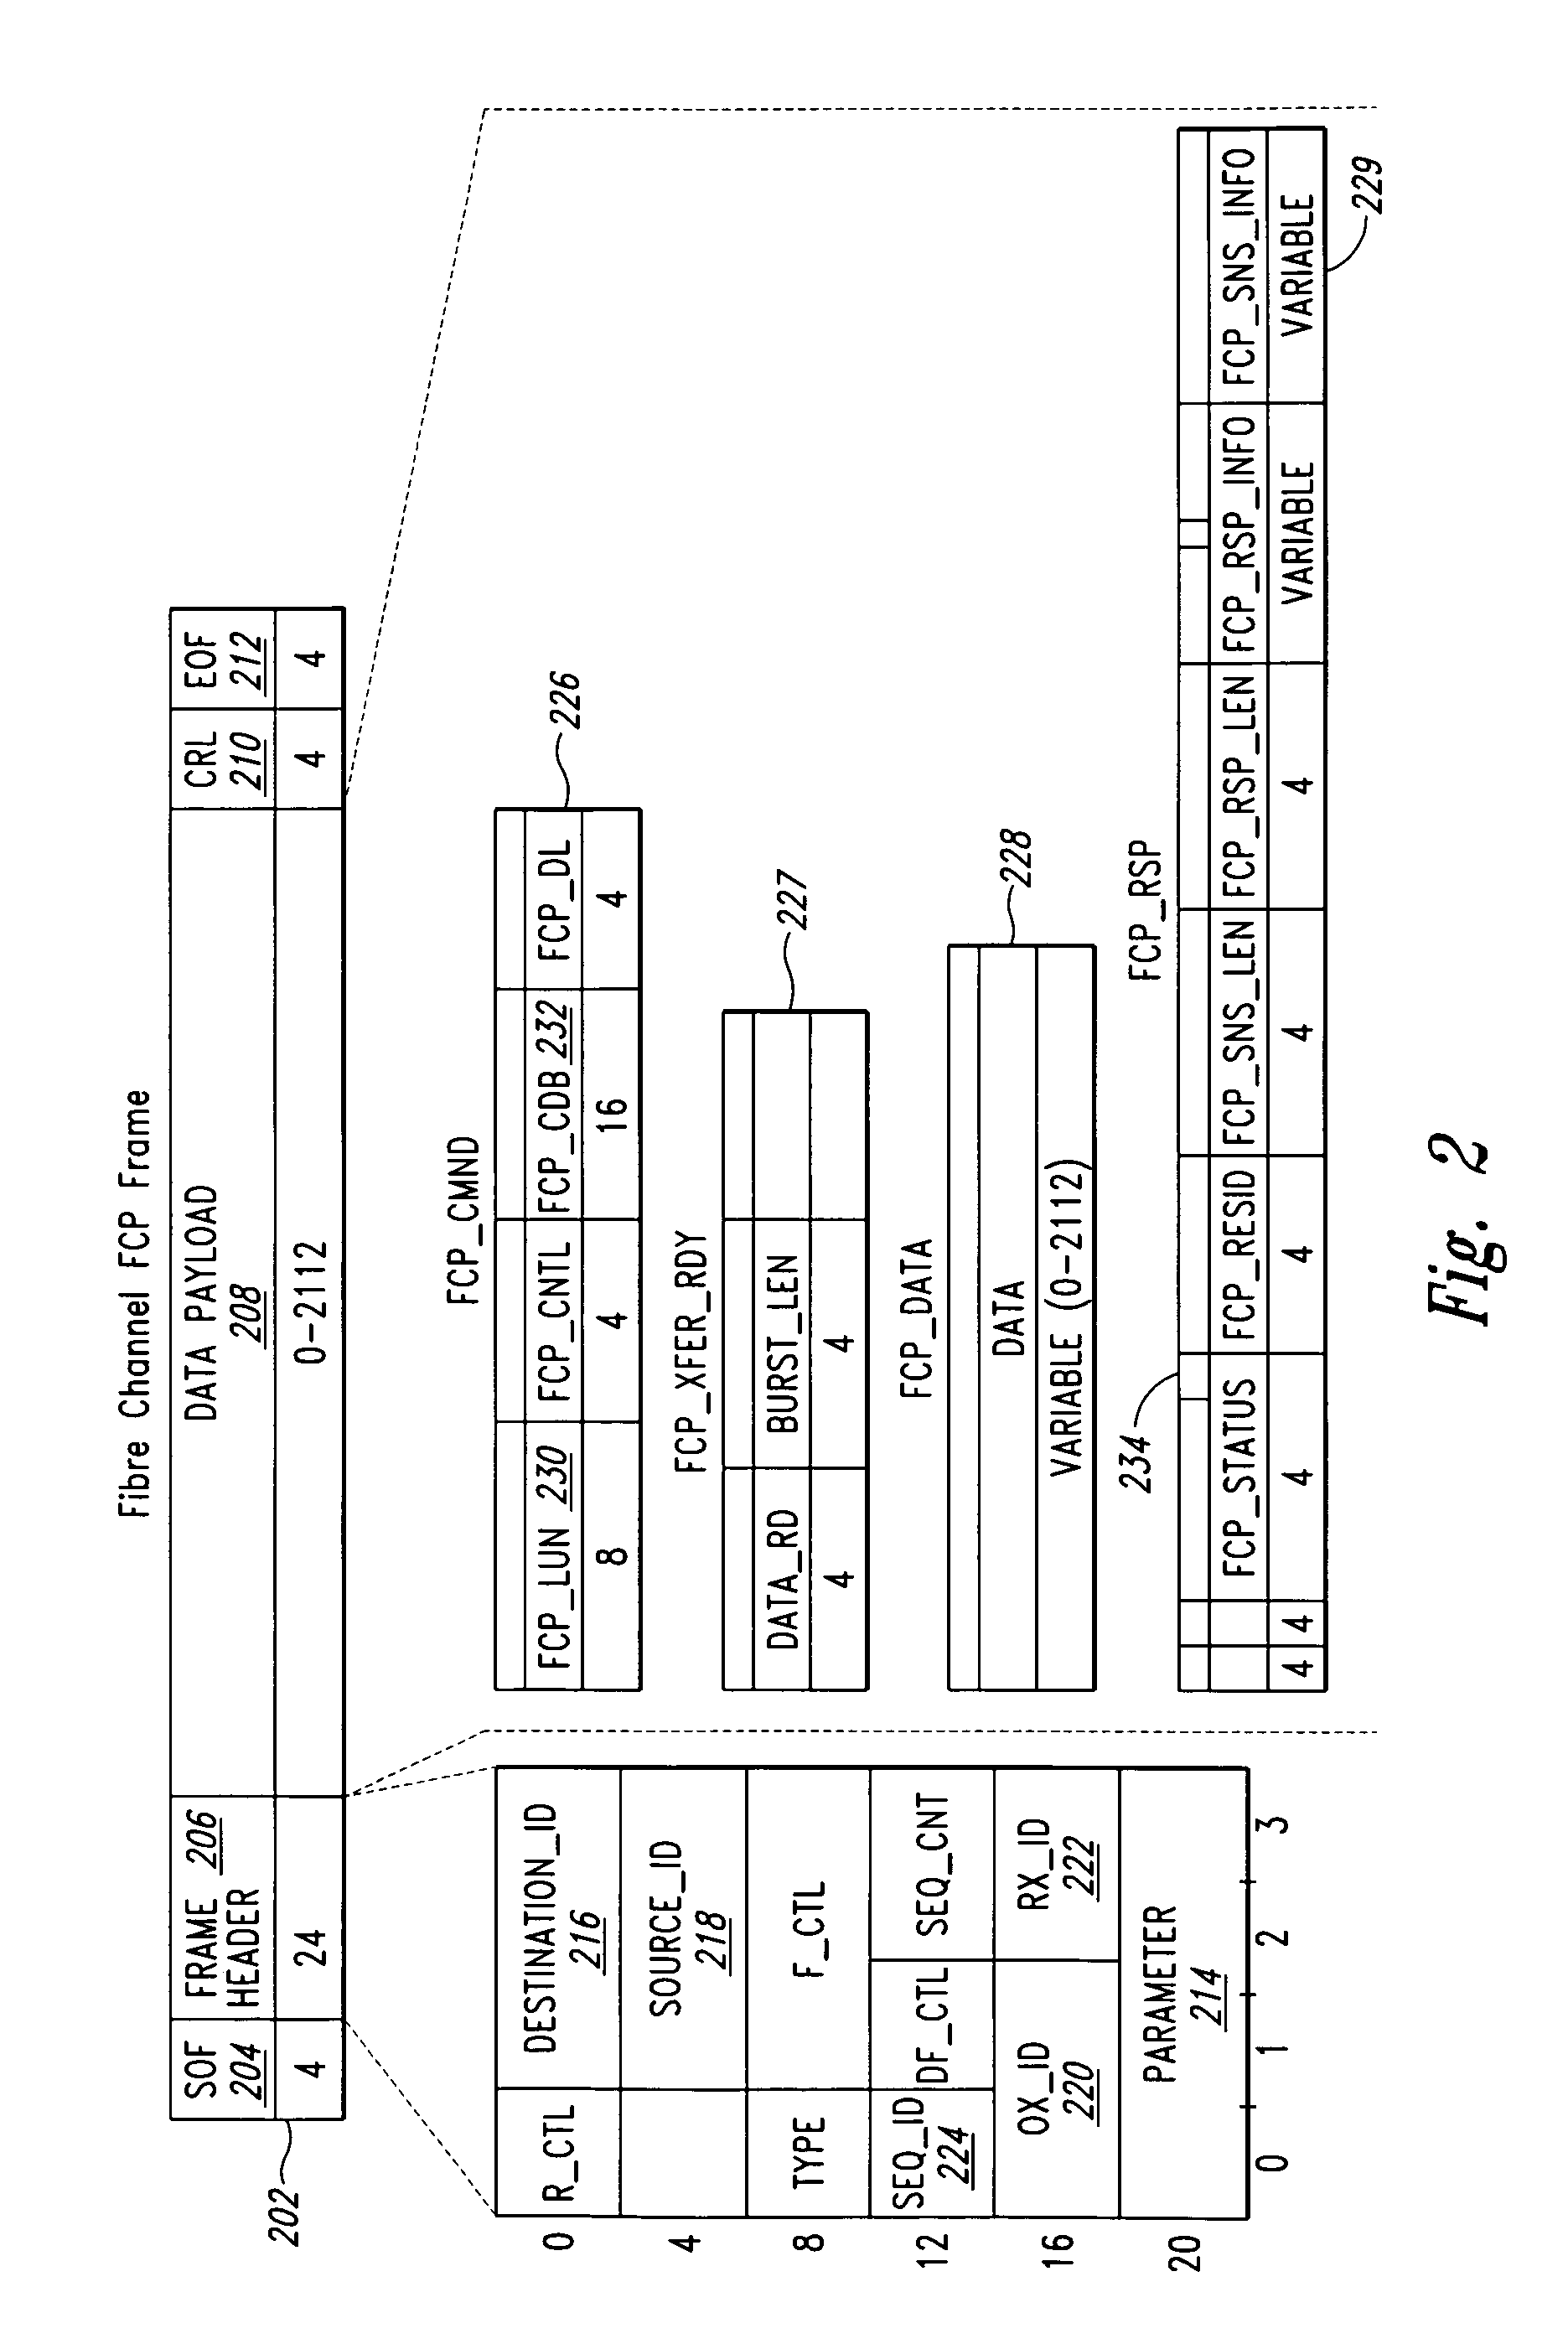 Method and system increasing performance substituting finite state machine control with hardware-implemented data structure manipulation